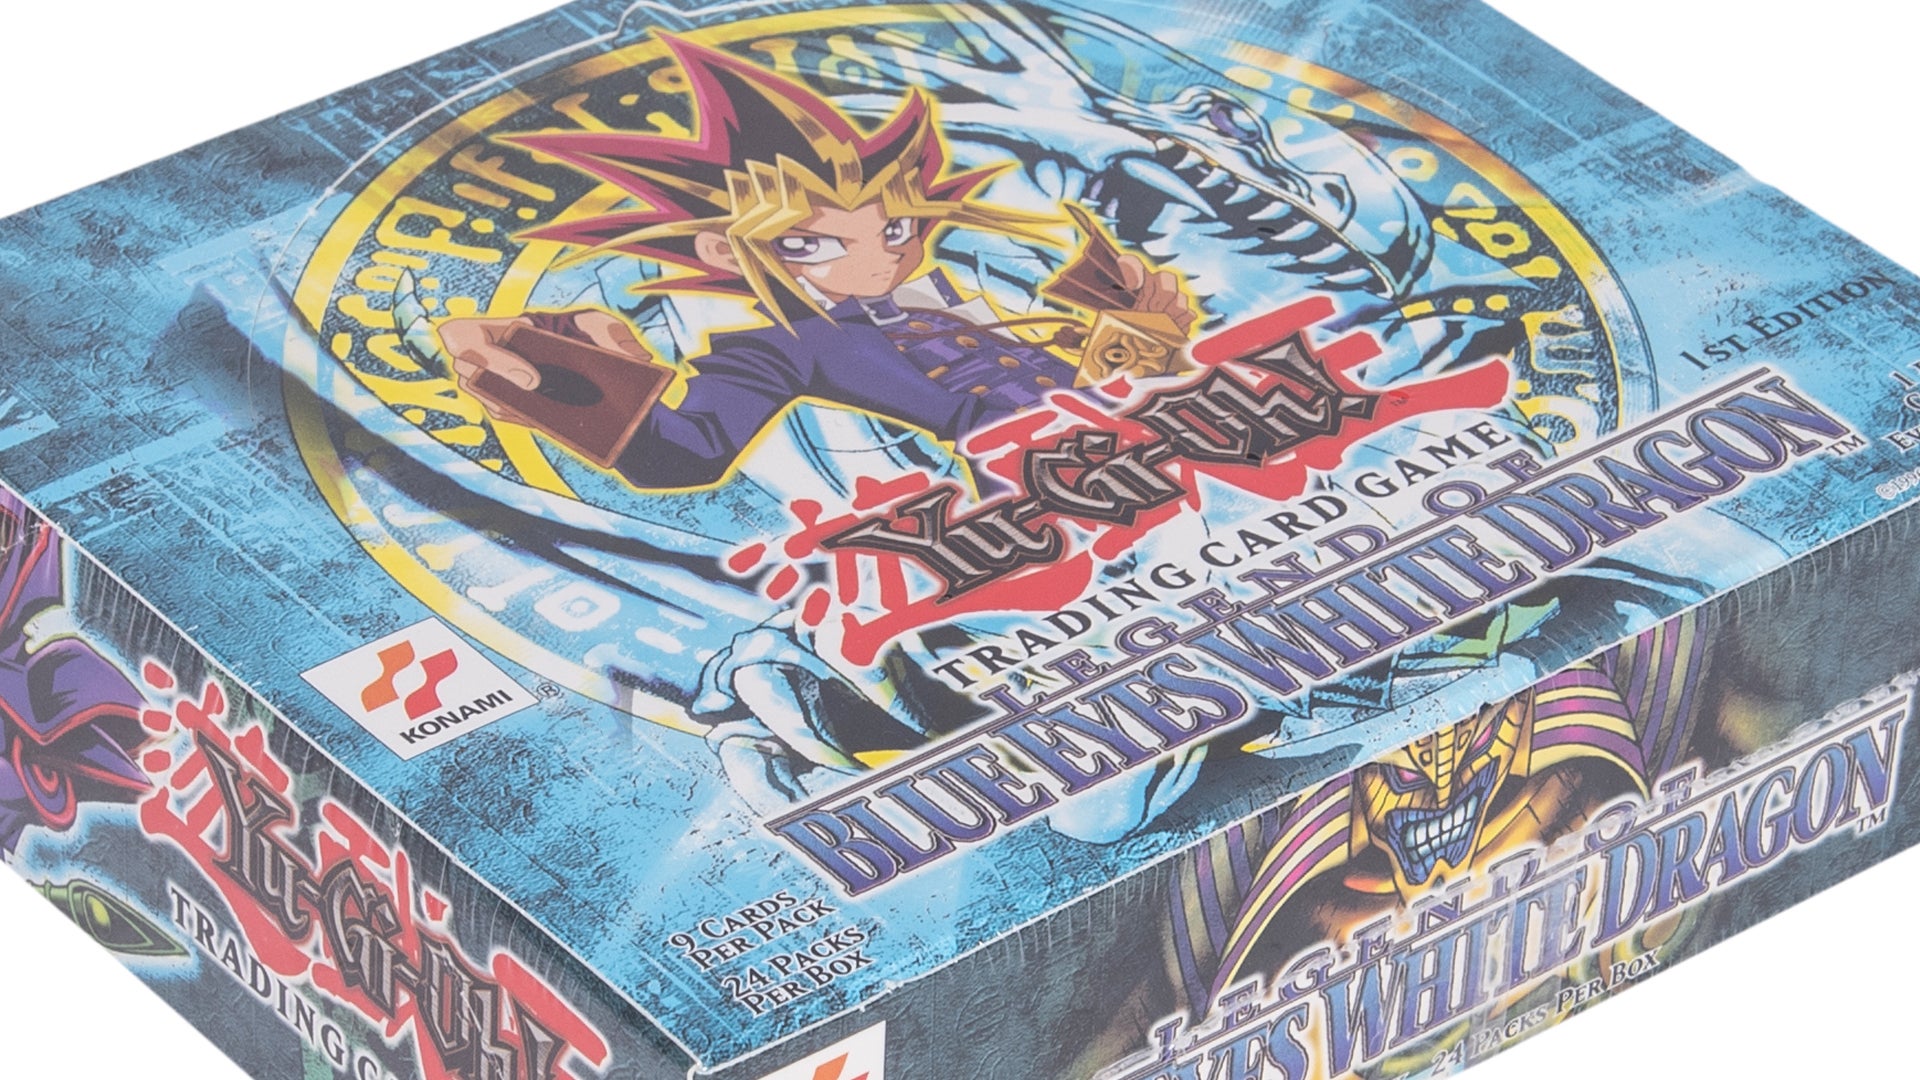 Dragons of Legend 2 1st Edition Booster Box Sealed